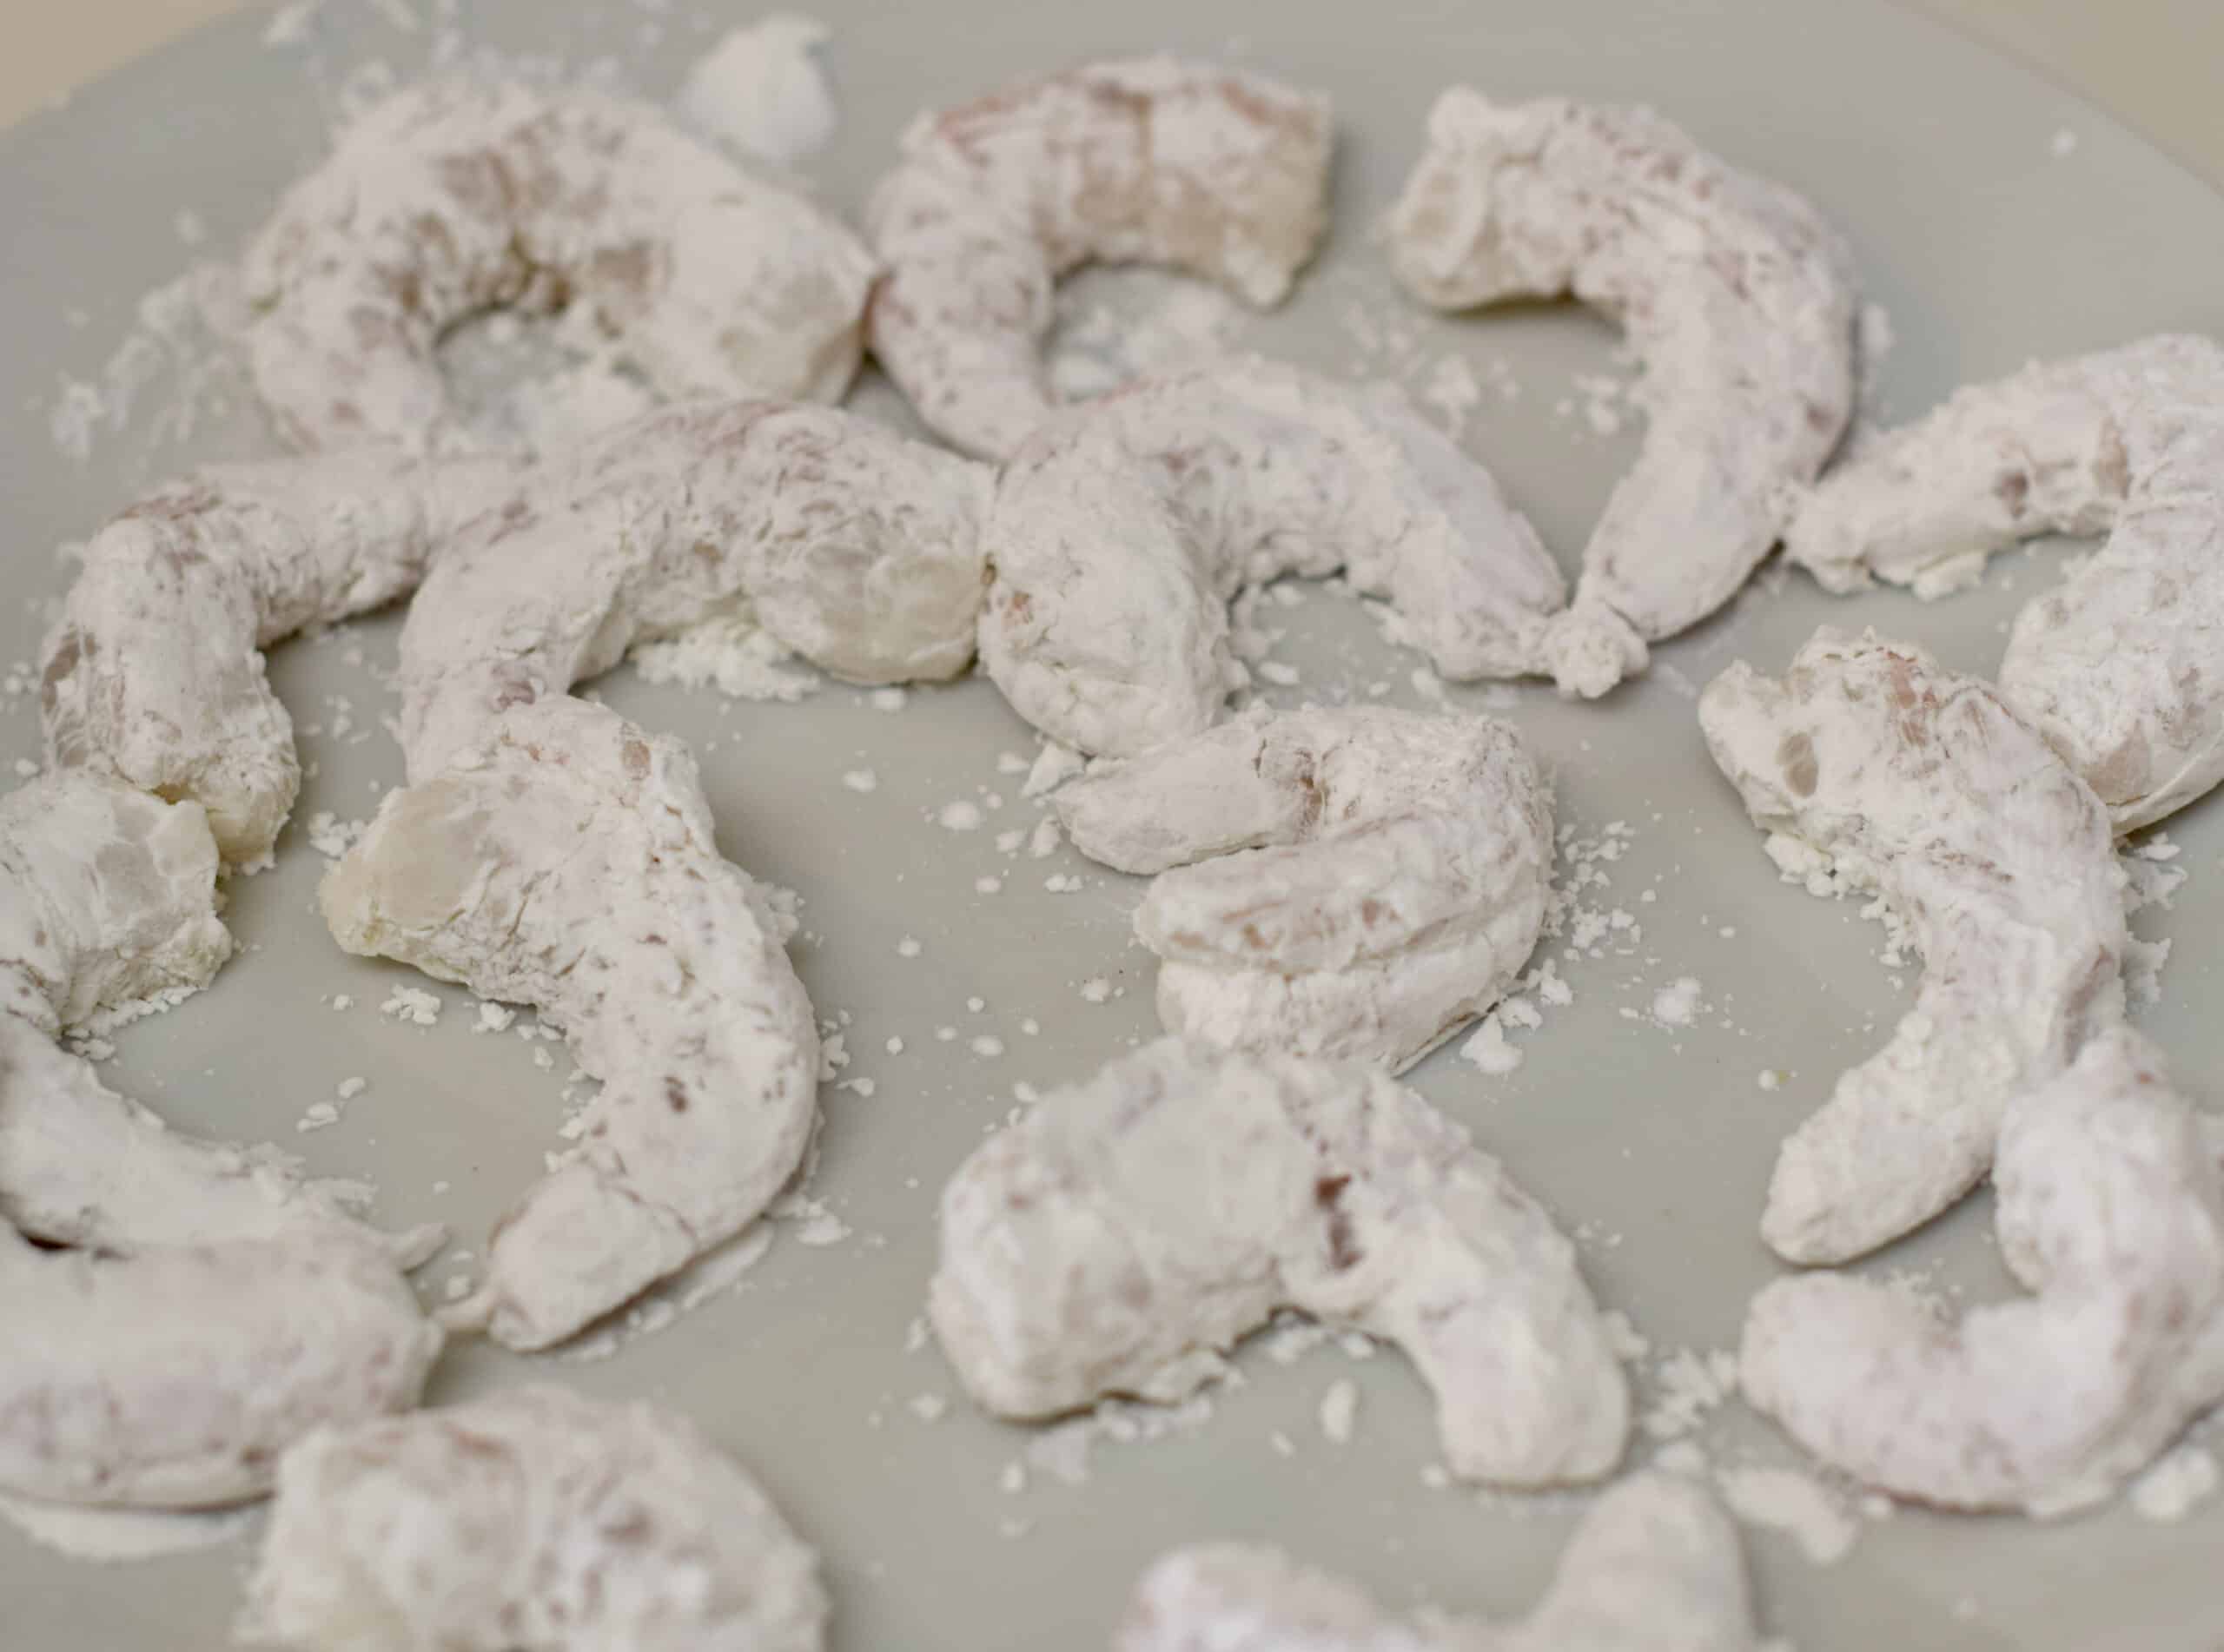 Shrimp with a light coating of rice flour ready for the pan to make some Spicy sweet and sour shrimp.